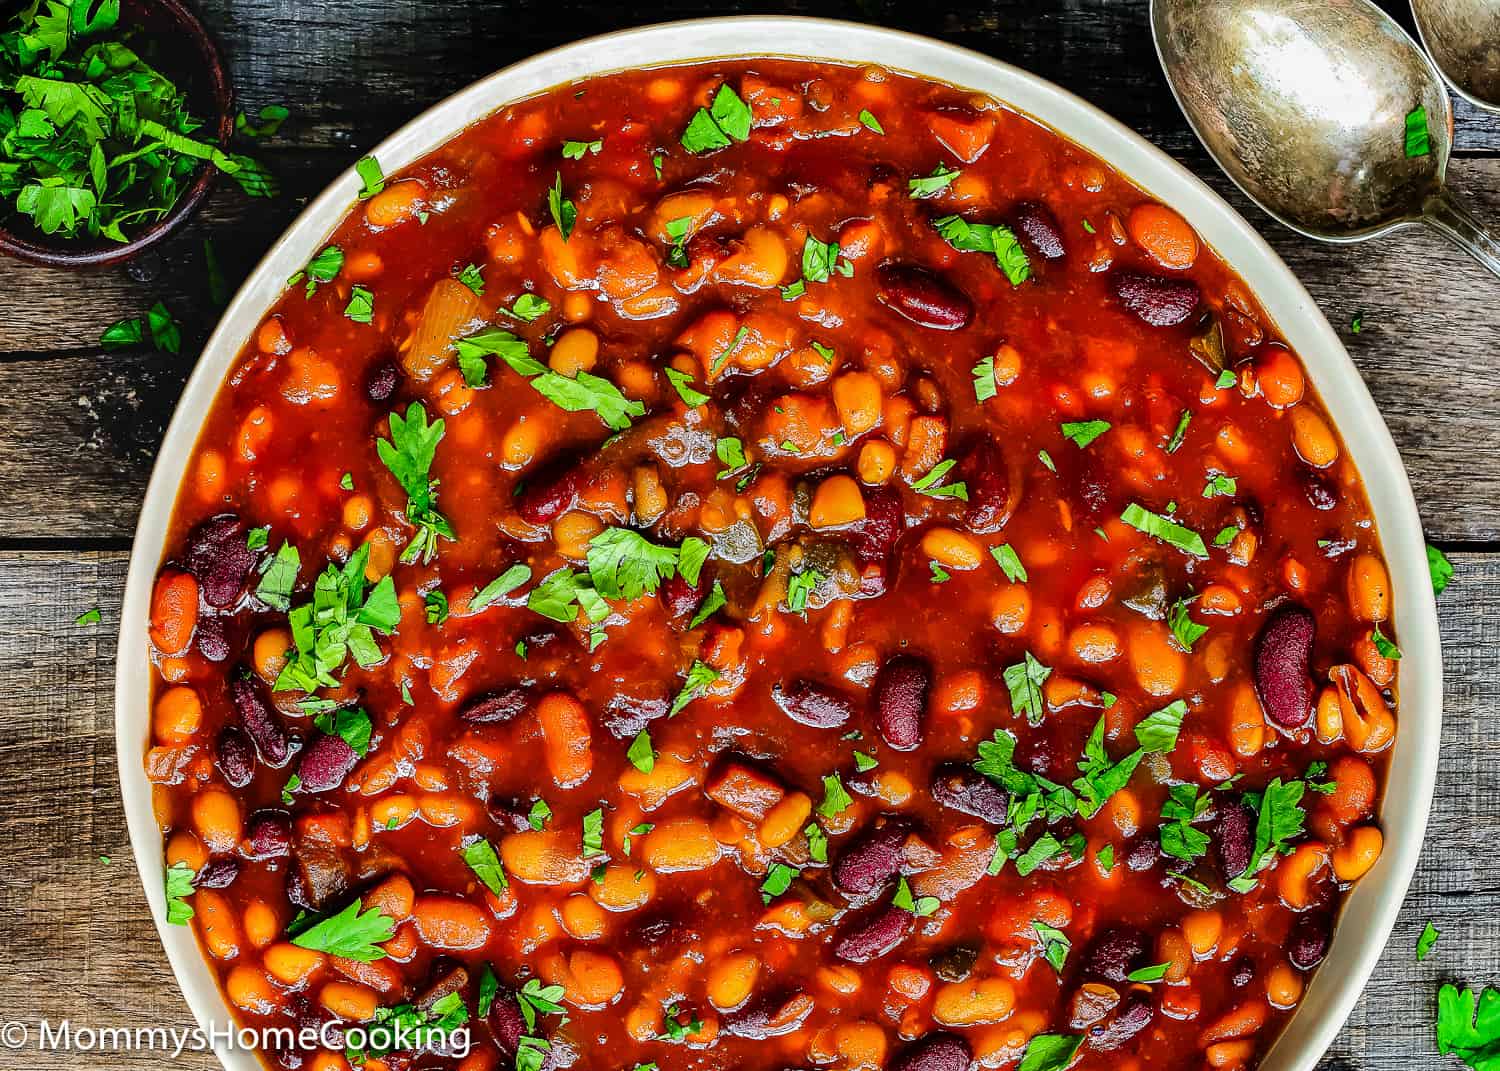 Homemade baked beans in a a bowl over a wooden surface.